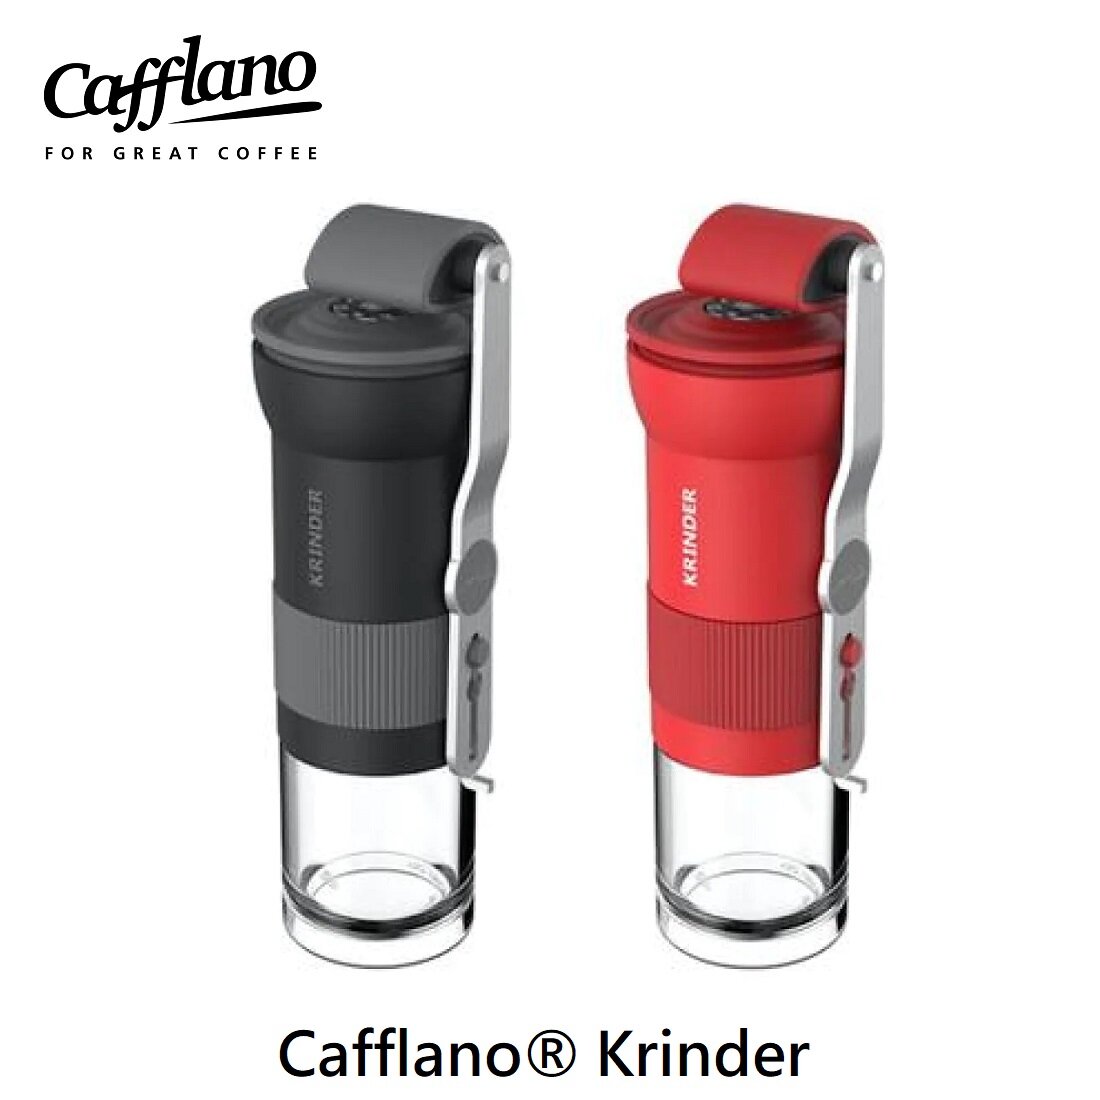 Cafflano - Krinder coffee manual grinder｜Hand grinding beans